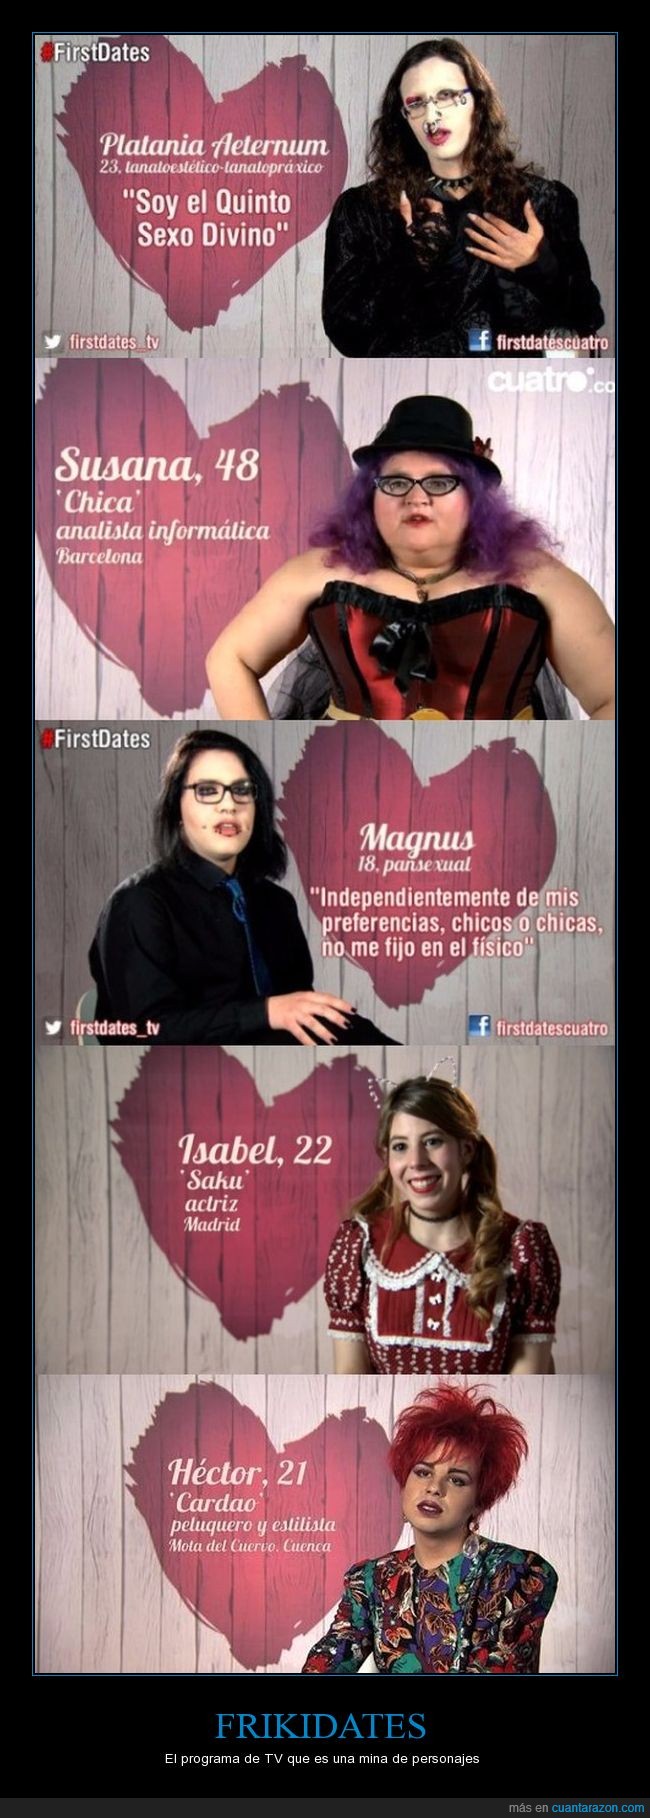 personajes,frikis,first dates